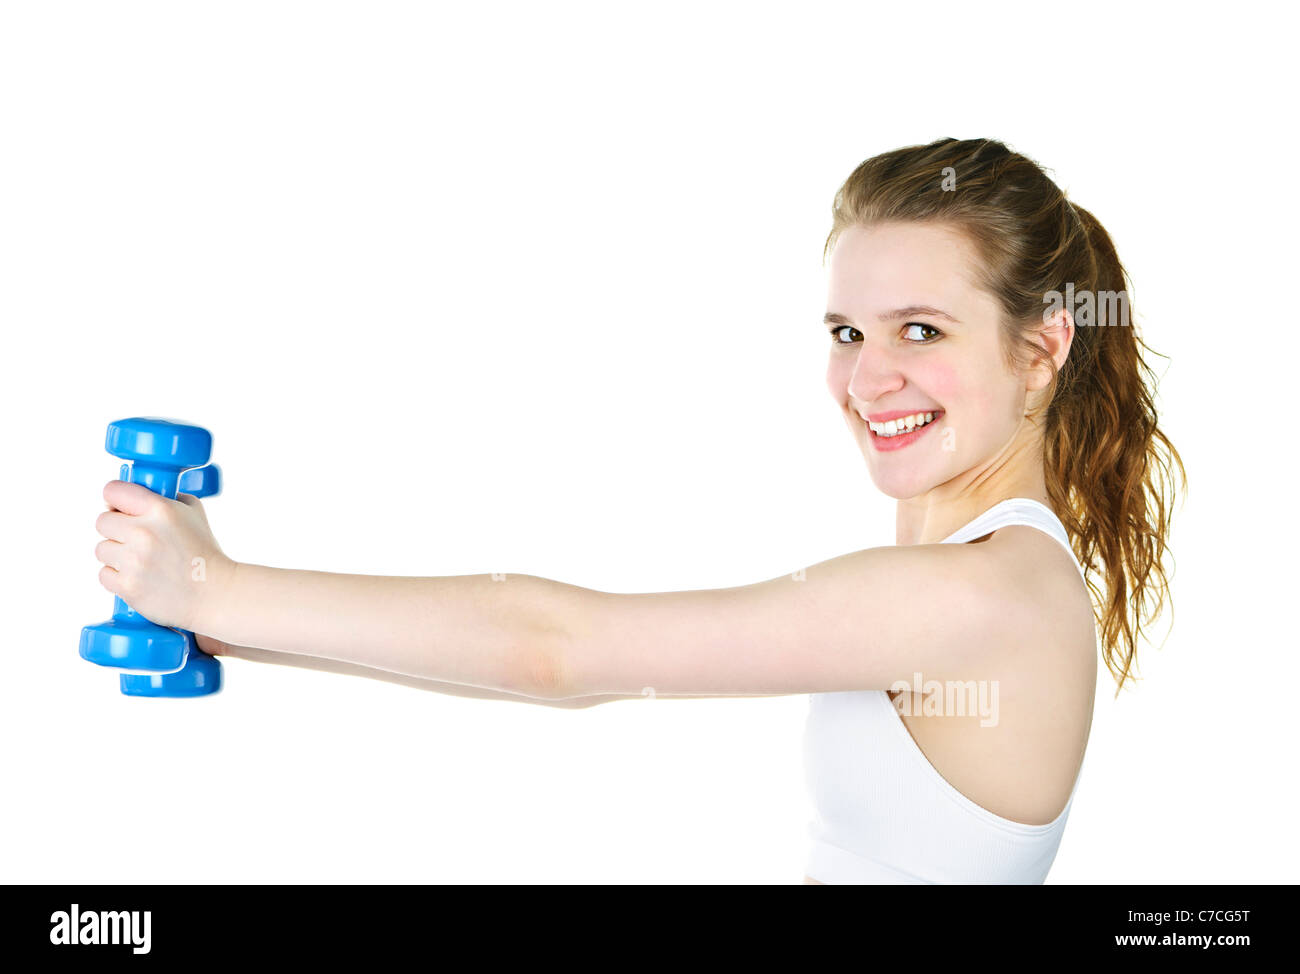 Happy healthy fit young woman lifting weights for fitness exercise Stock Photo